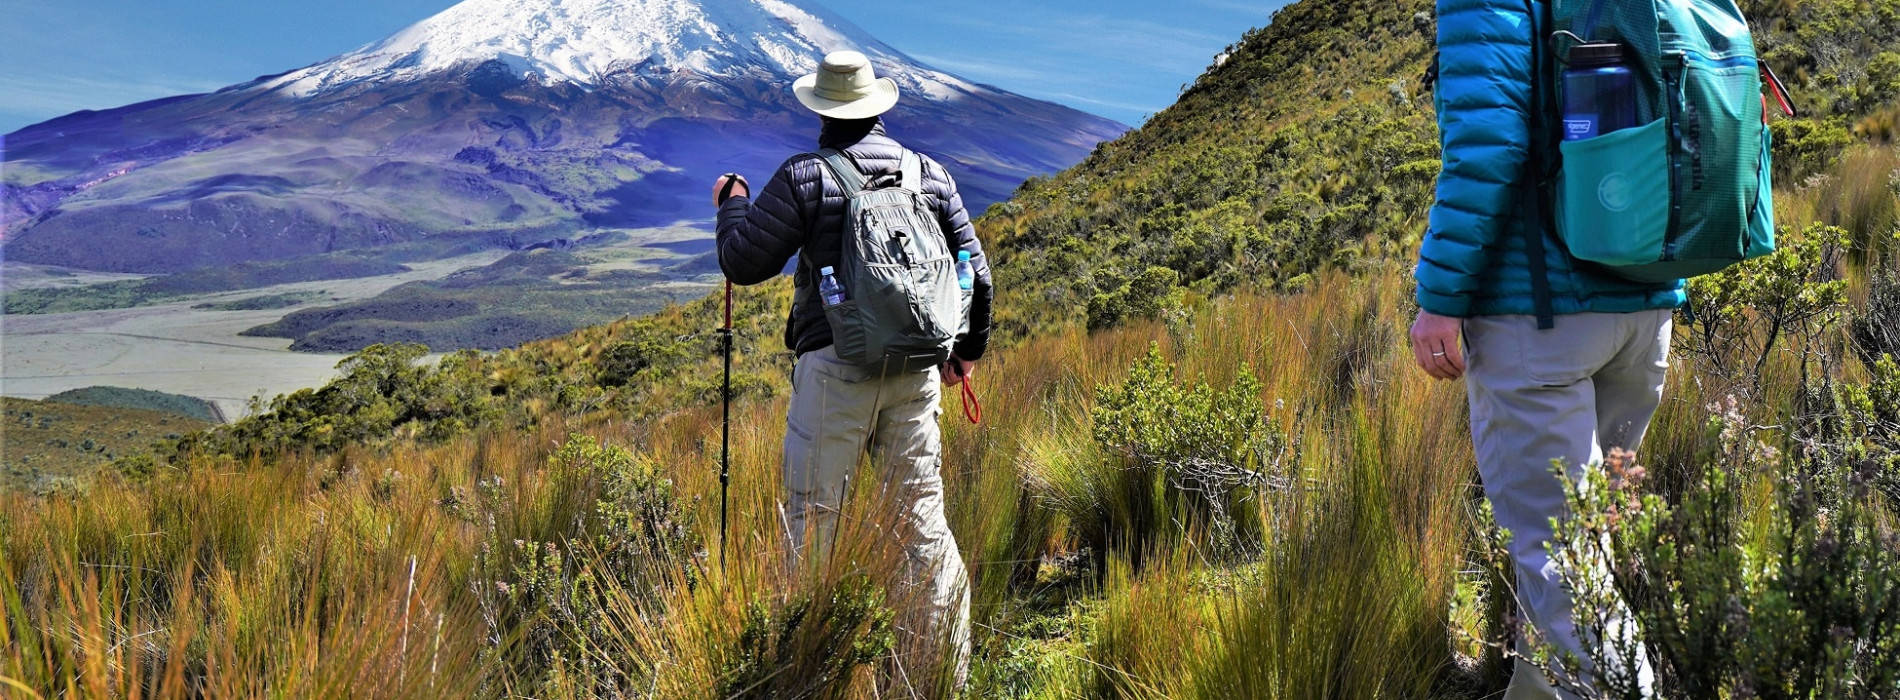 Acclimatisation Trek to Cotopaxi Viewpoint